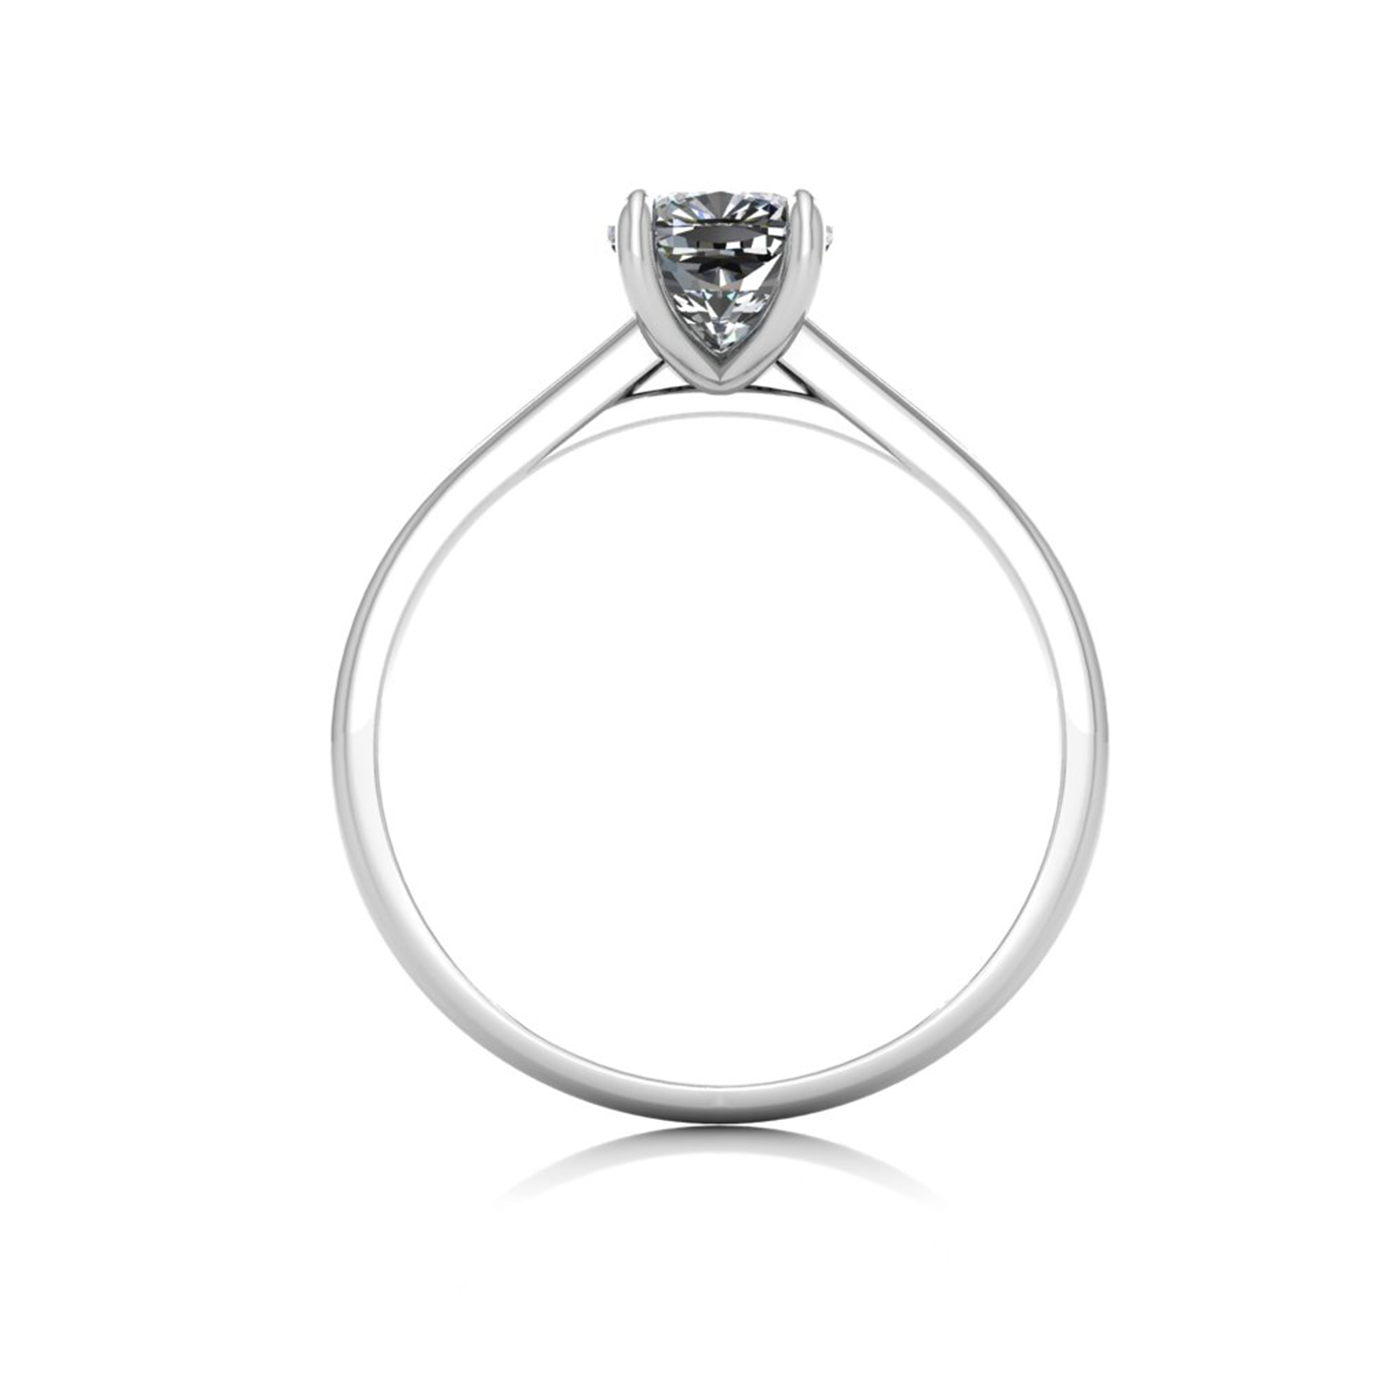 18k white gold 1.0ct 4 prongs solitaire cushion cut diamond engagement ring with whisper thin band